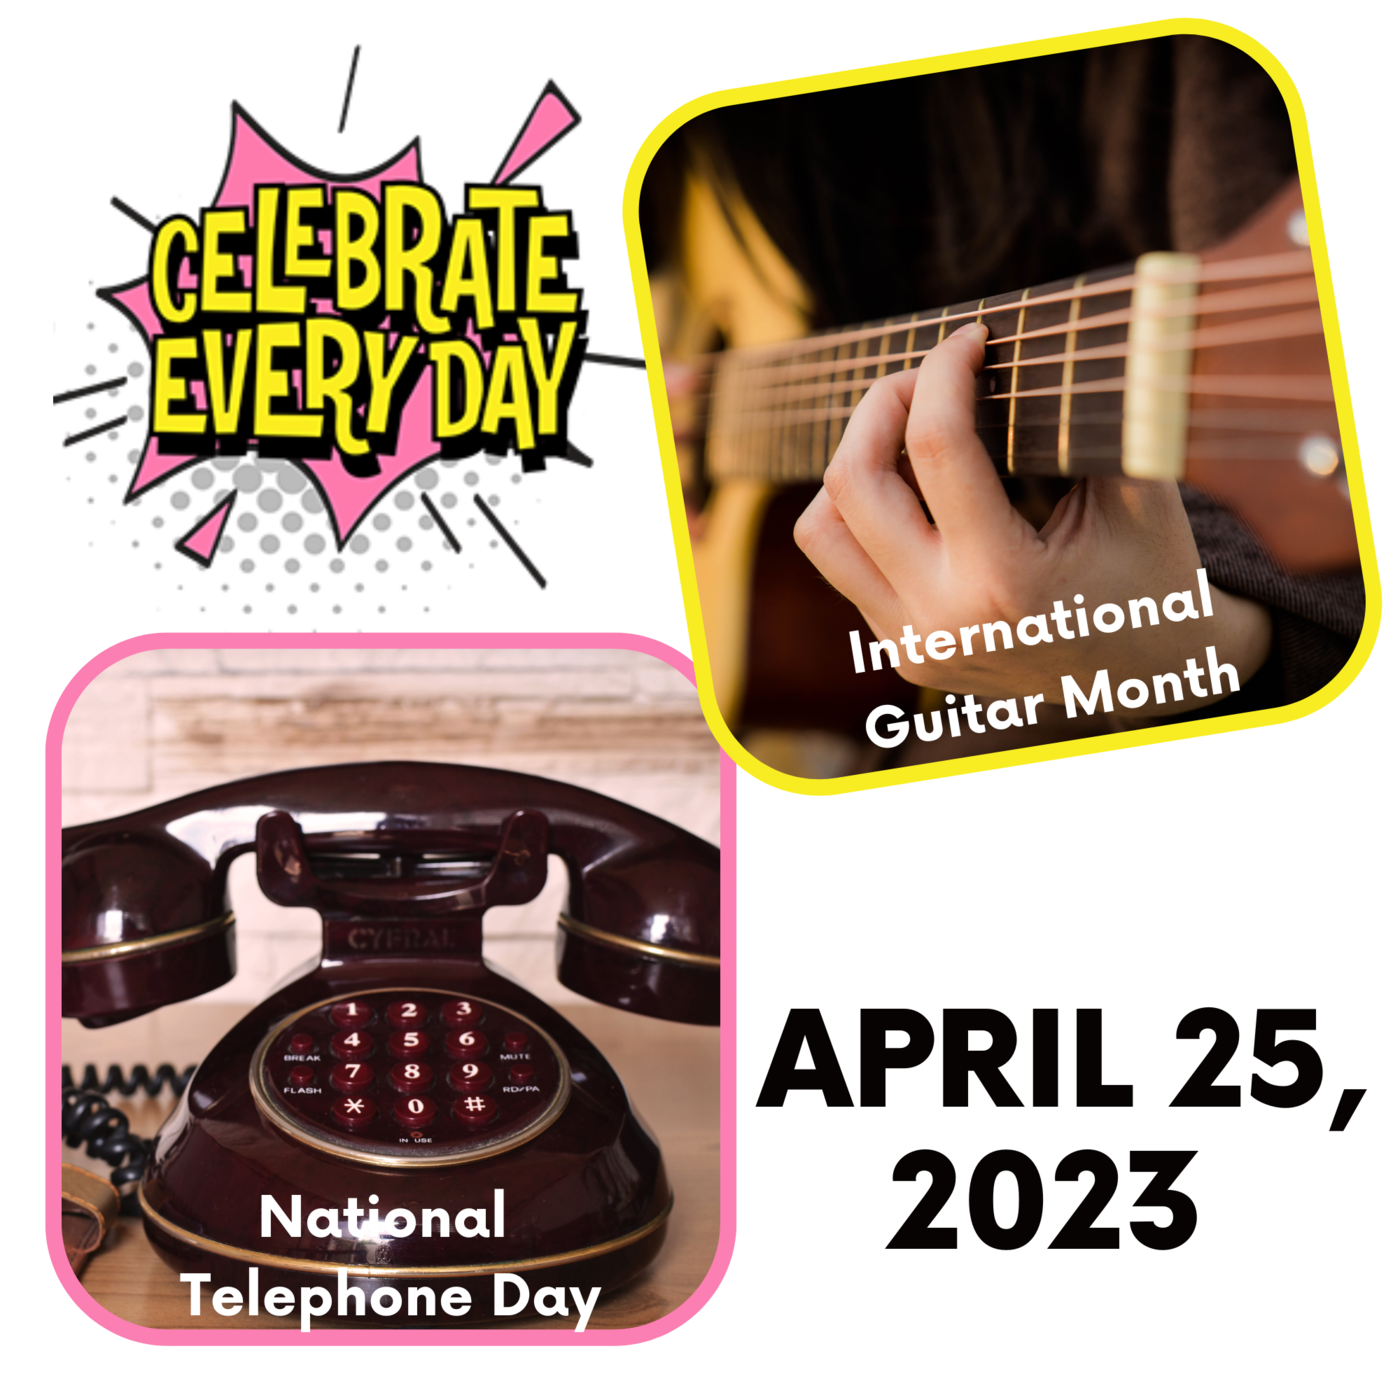 April 25, 2023 - International Guitar Month | National Telephone Day